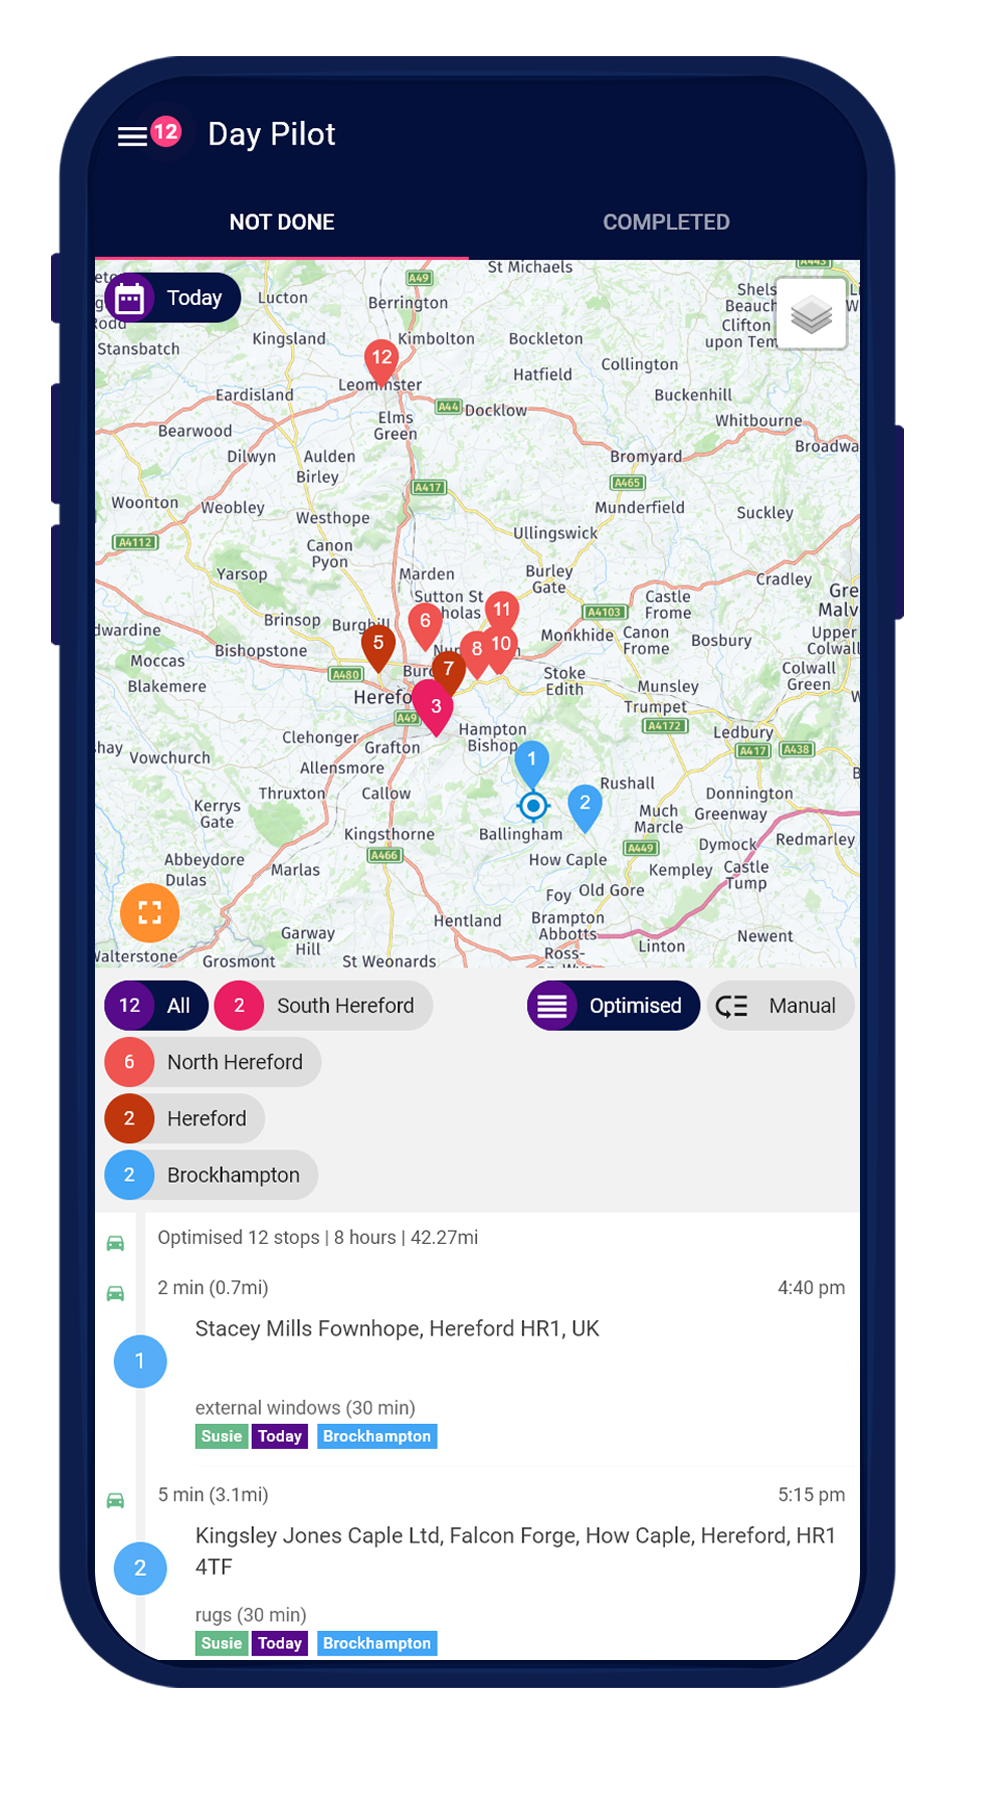 Day Pilot view on mobile showing job locations in an optimised route.